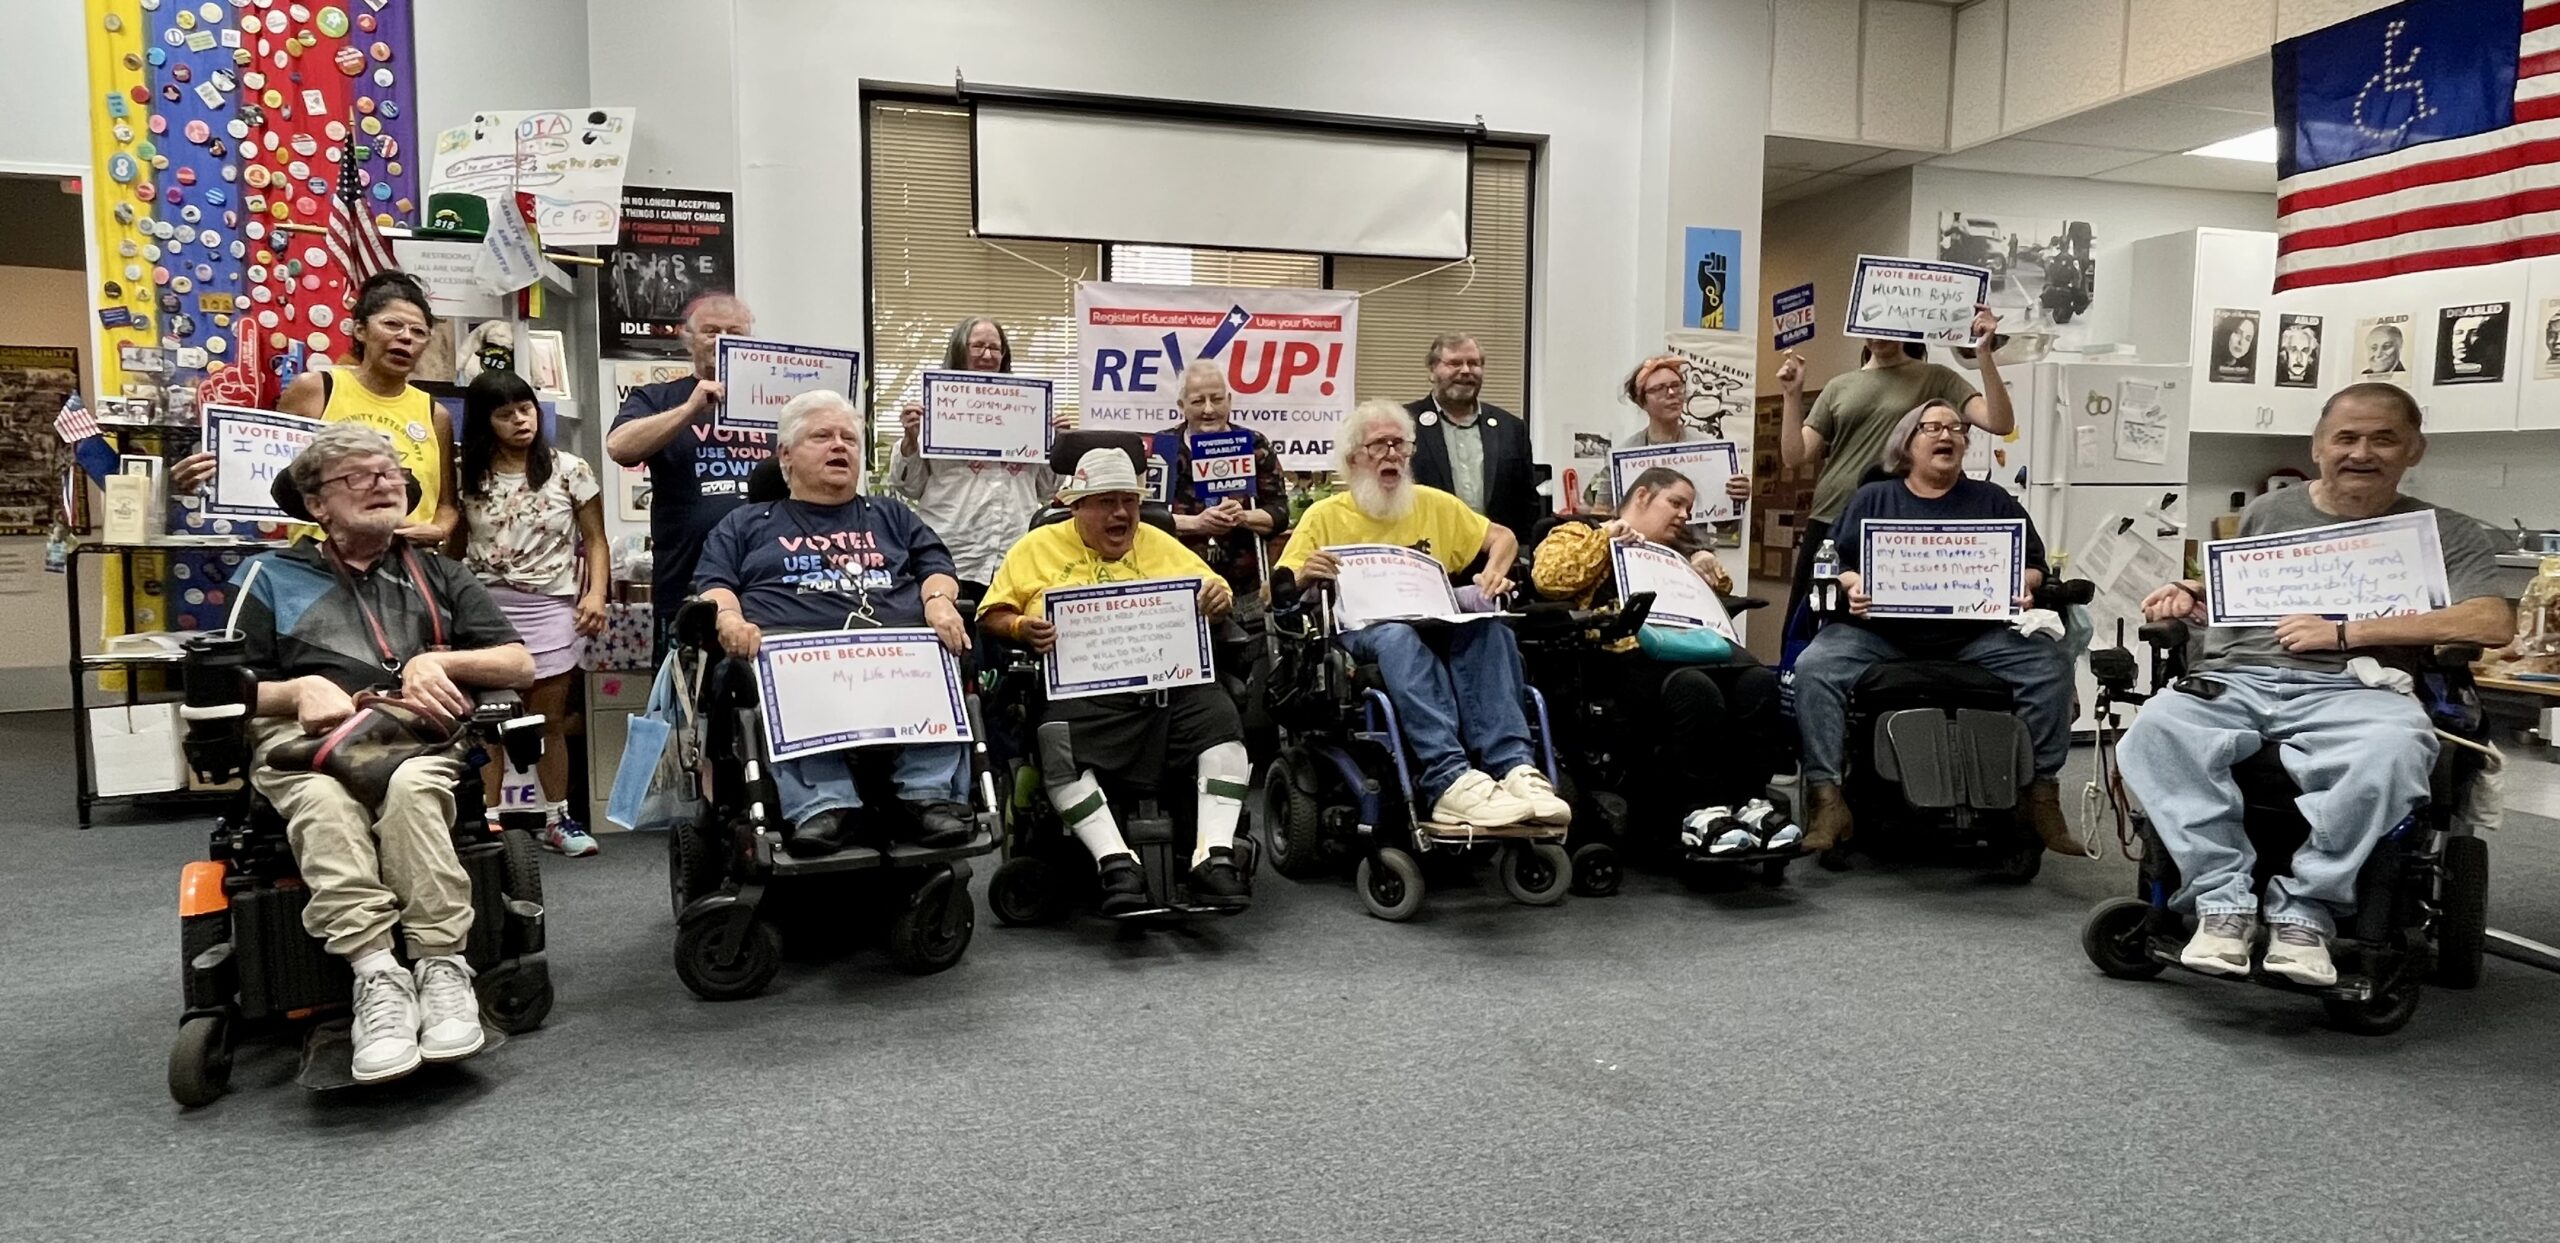 A group of advocates with disabilities are holding up voting advocacy signs in a room that looks like a political campaign office